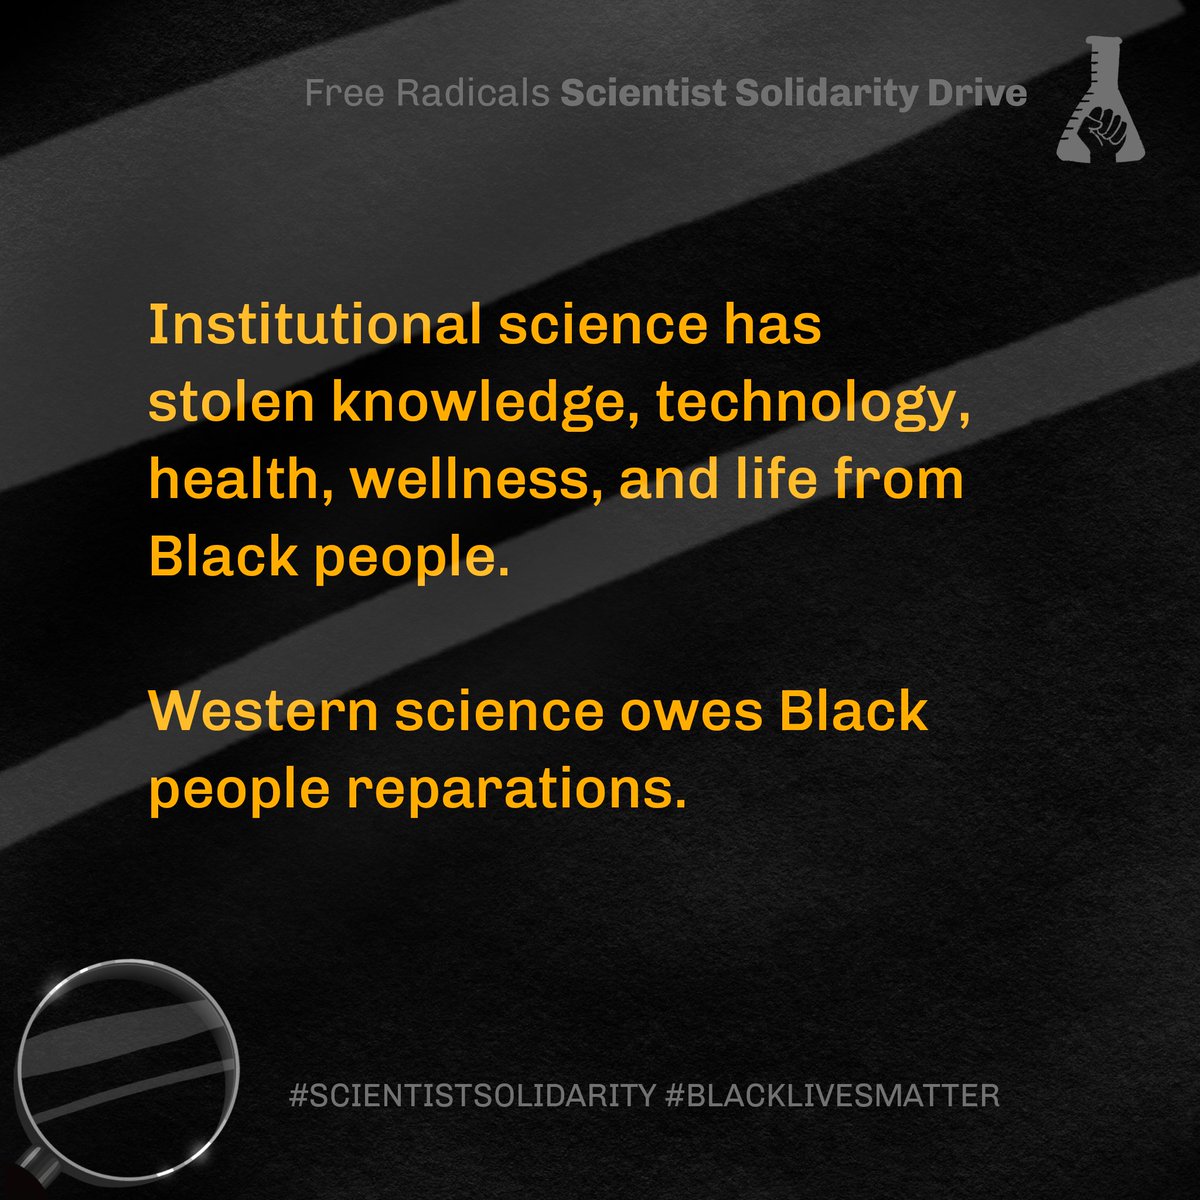 Part of practicing solidarity is unlearning & relearning what we’ve been taught about science in the classroom. We posted this thread on how the origins & foundation (as well as the present-day structures) of Western institutional science are anti-Black.  https://twitter.com/freeradsorg/status/1270389796624494592